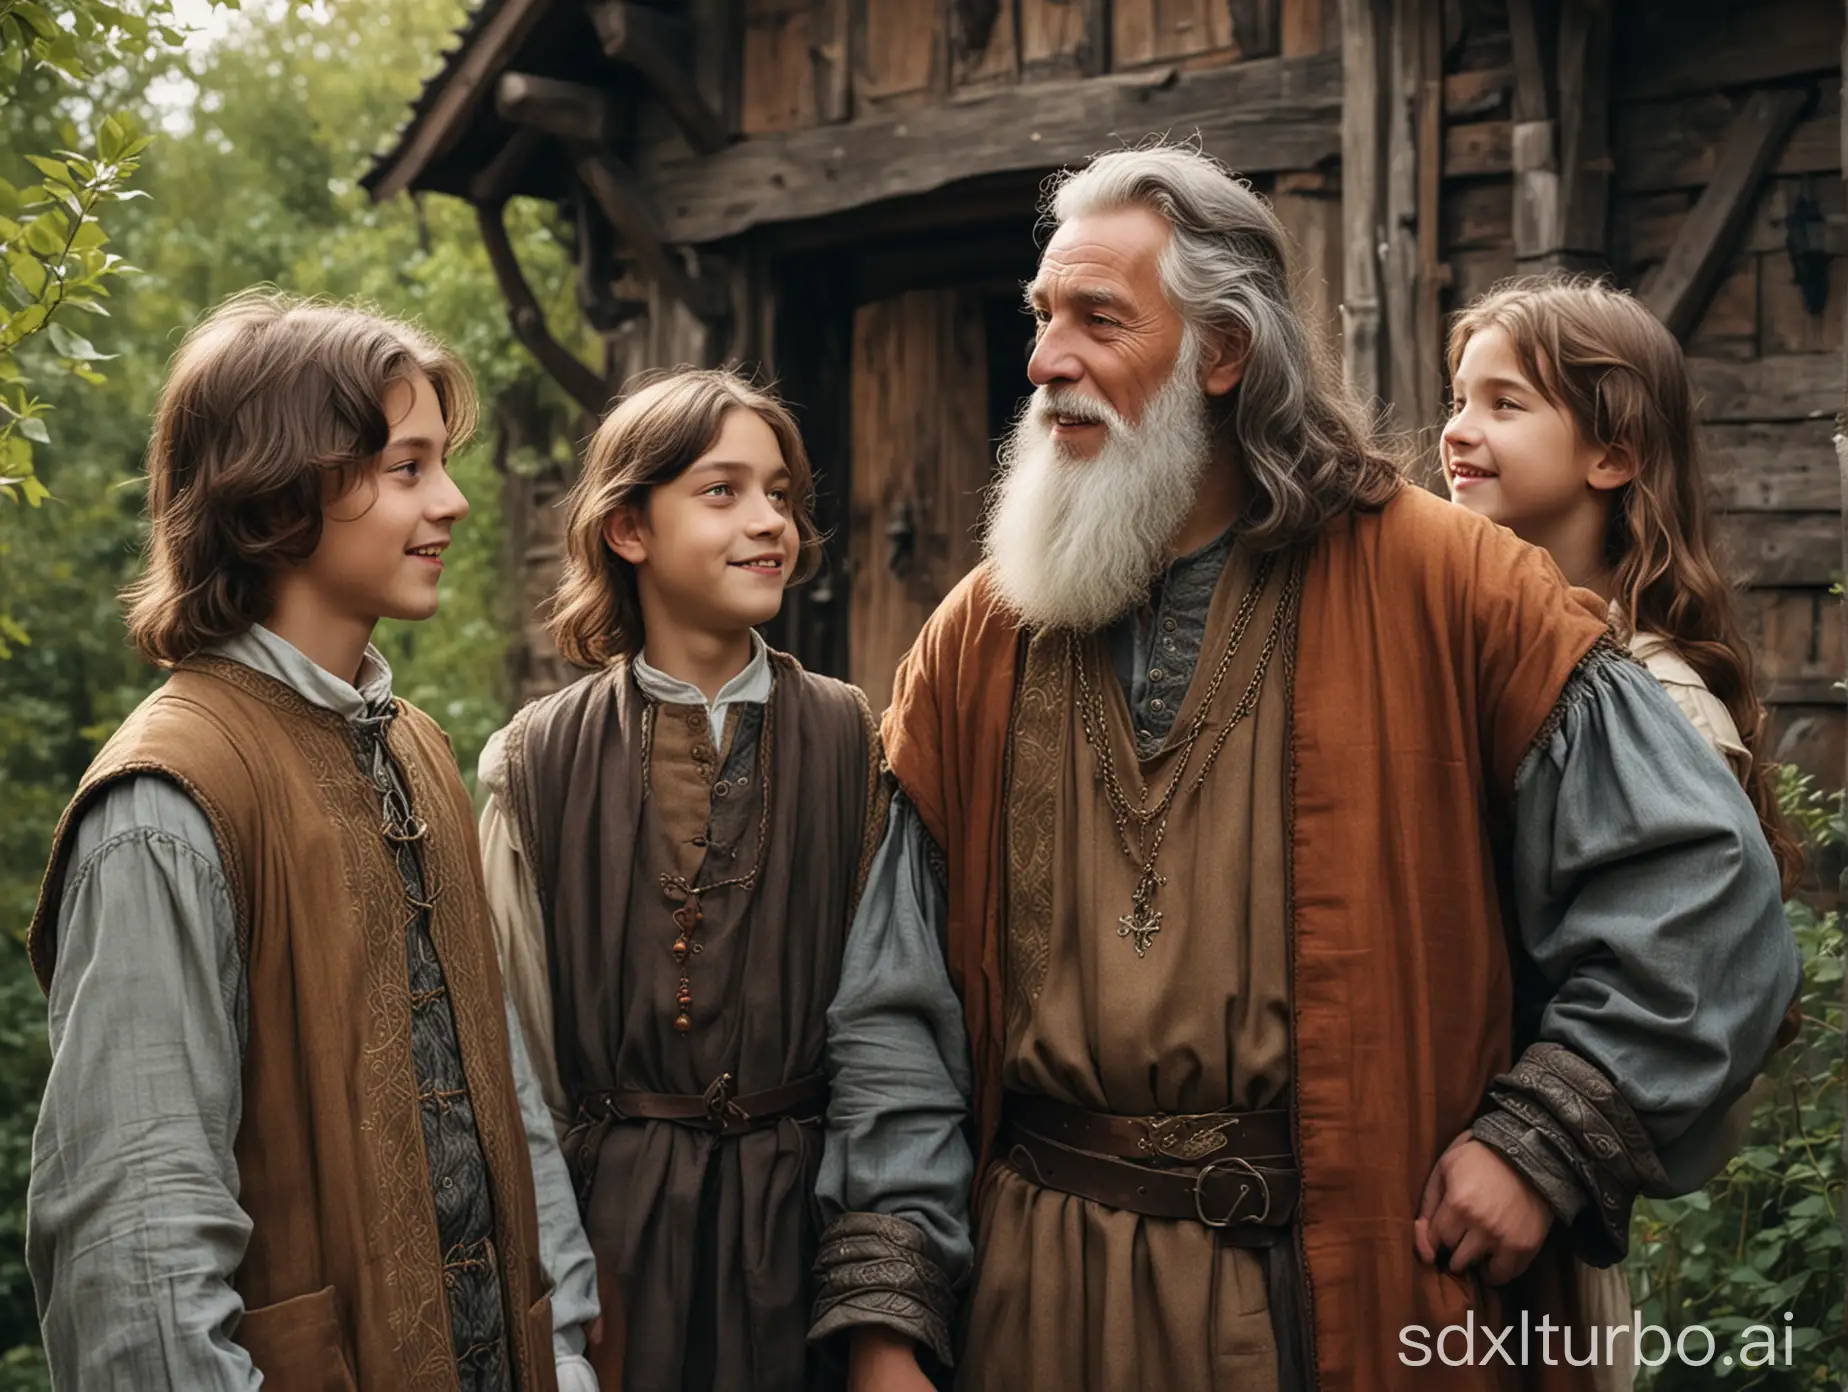 Medieval-Boys-Meeting-Wise-Elder-in-Forest-Thicket